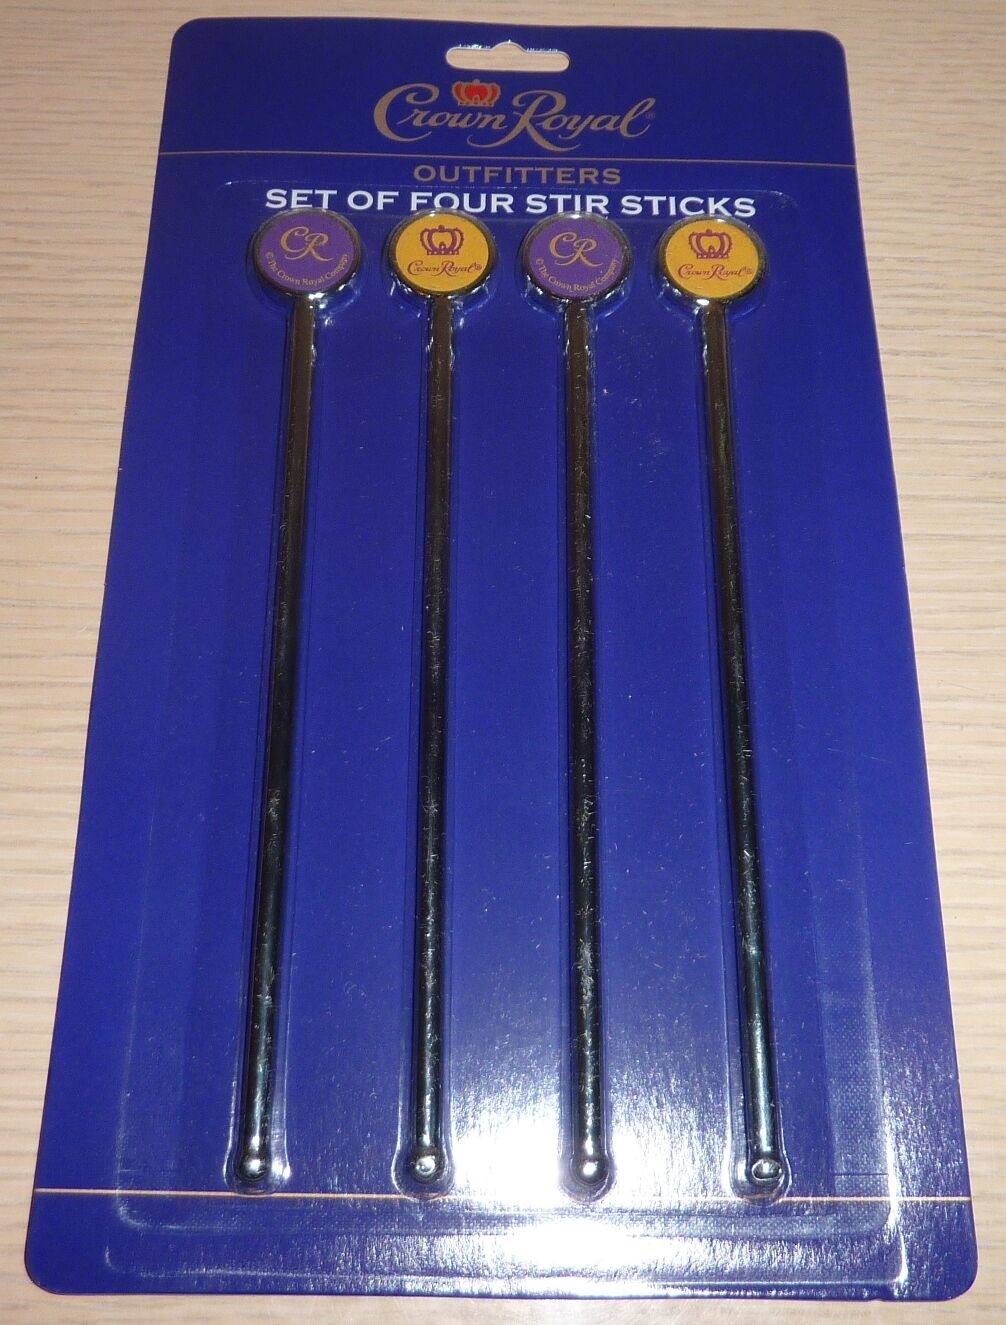 Crown Royal Outfitters Stir Sticks, A Set Of Four Metal Beverage Stirrers